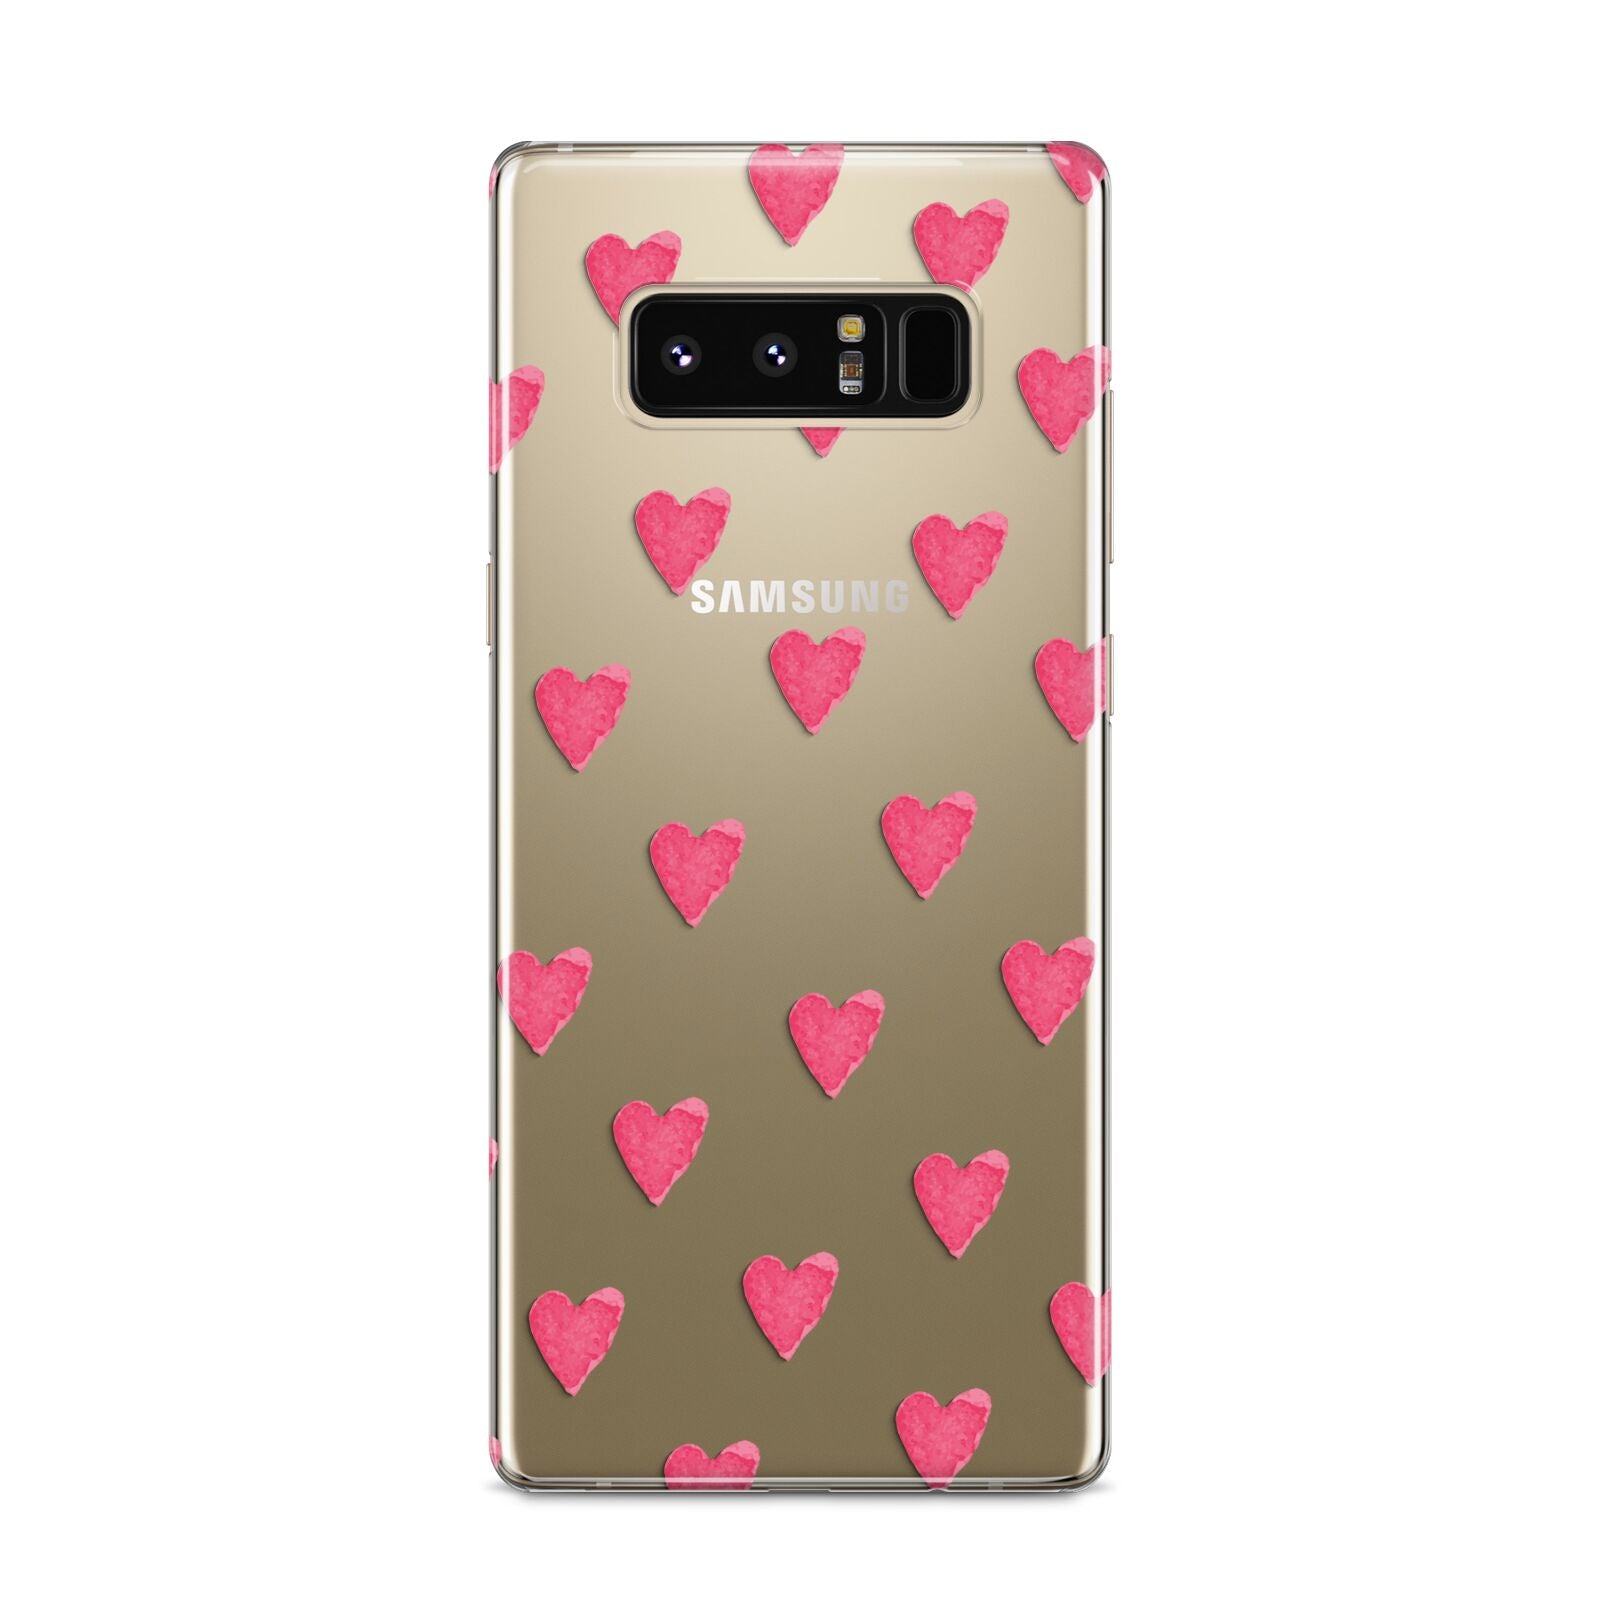 Heart Patterned Samsung Galaxy S8 Case